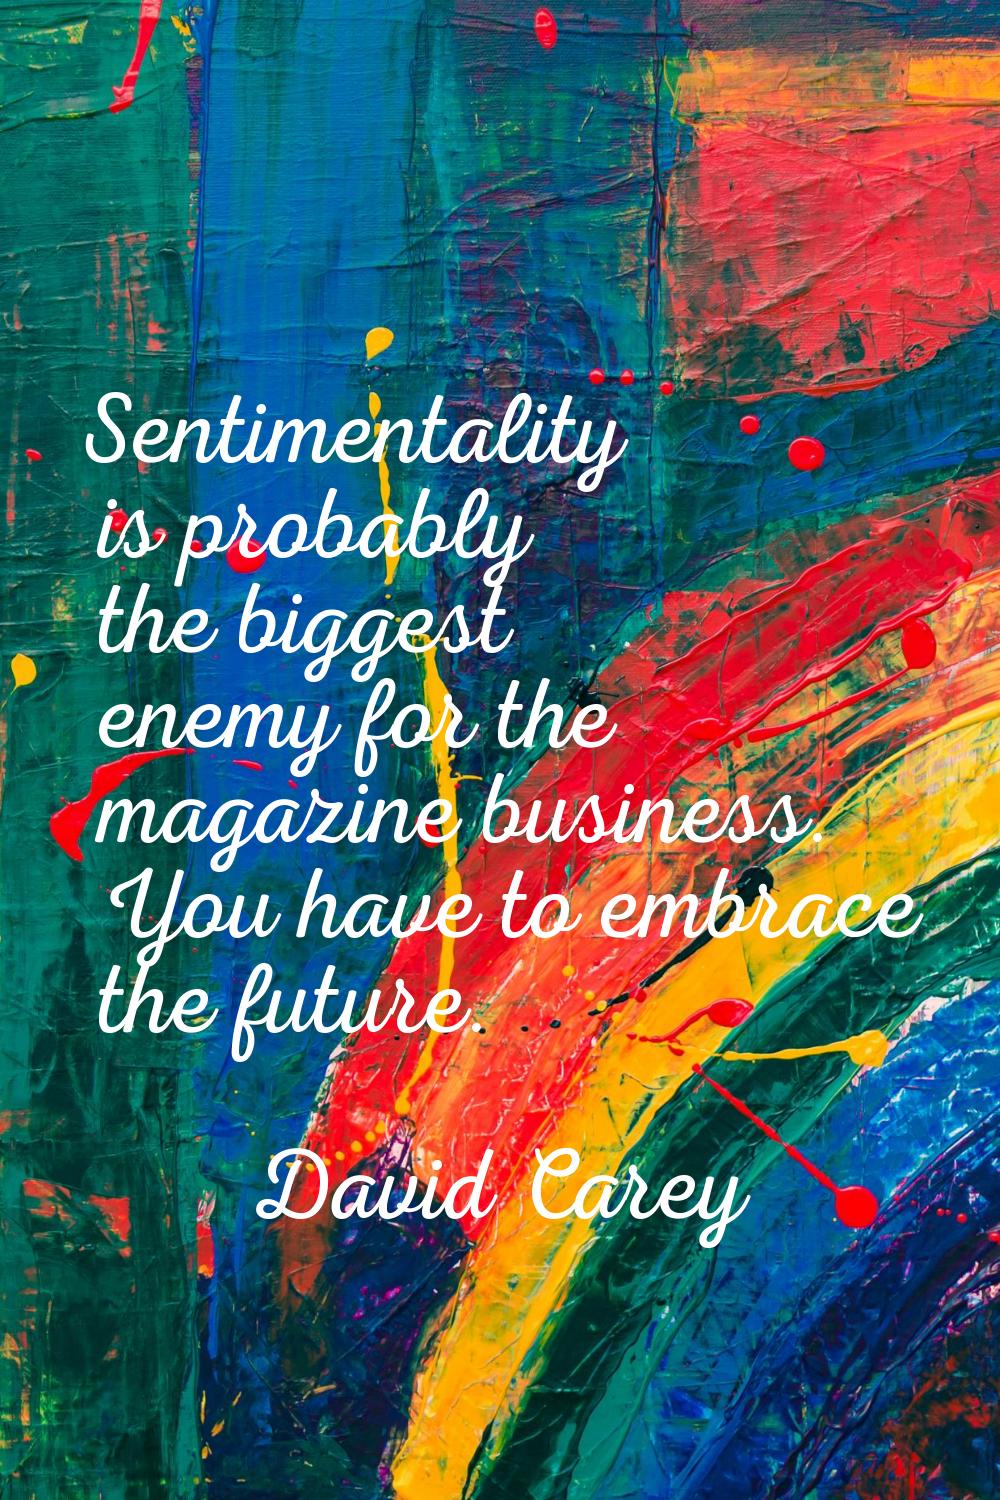 Sentimentality is probably the biggest enemy for the magazine business. You have to embrace the fut